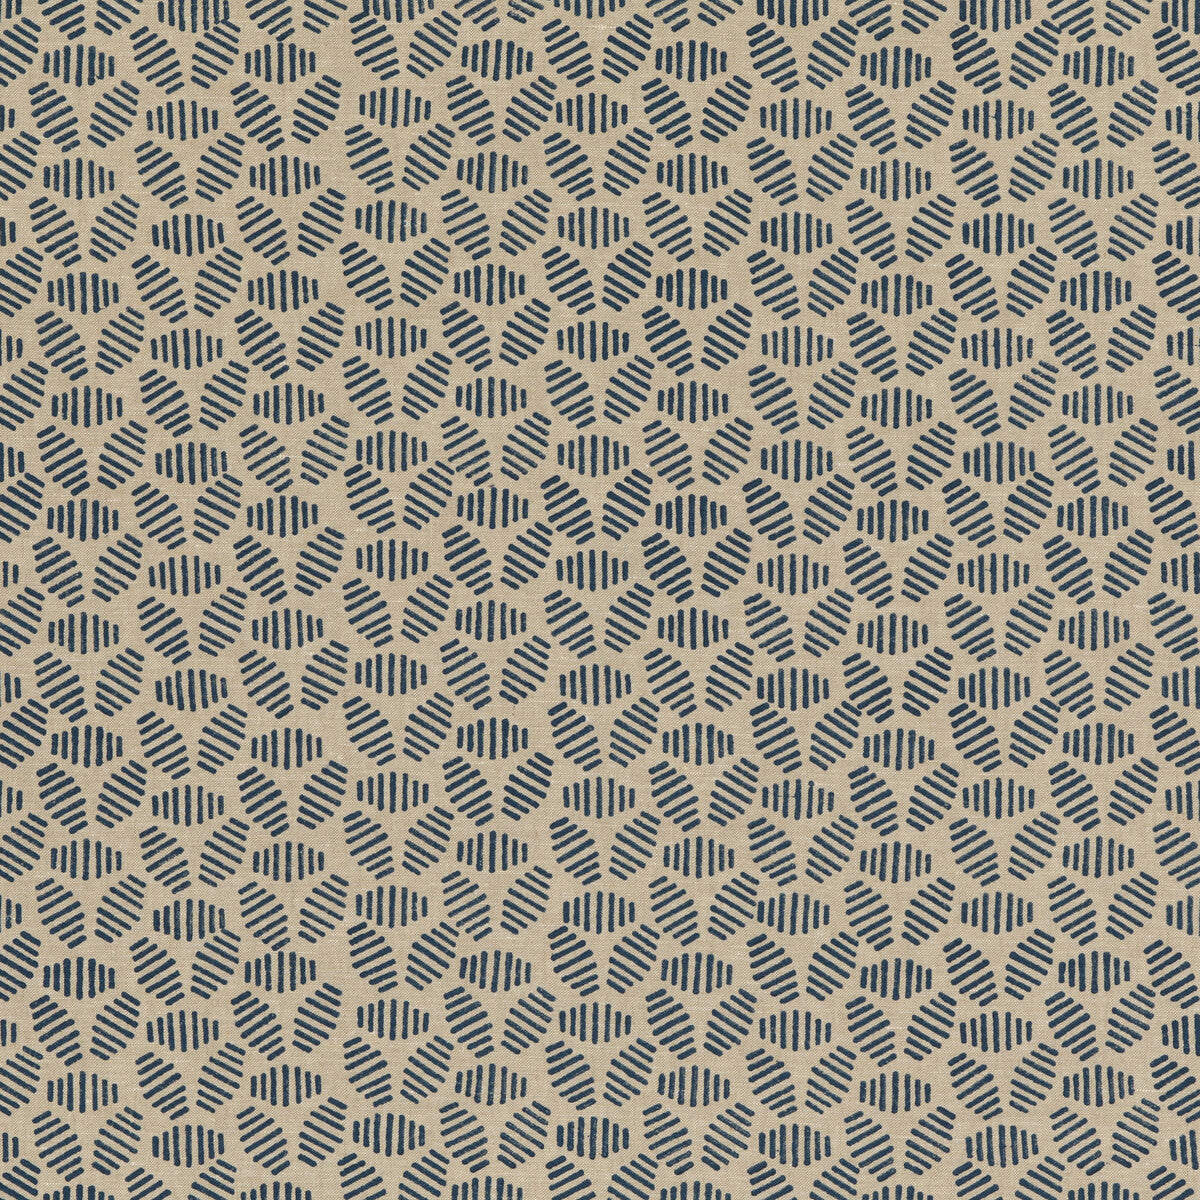 Bumble Bee fabric in indigo color - pattern PP50482.1.0 - by Baker Lifestyle in the Block Party collection